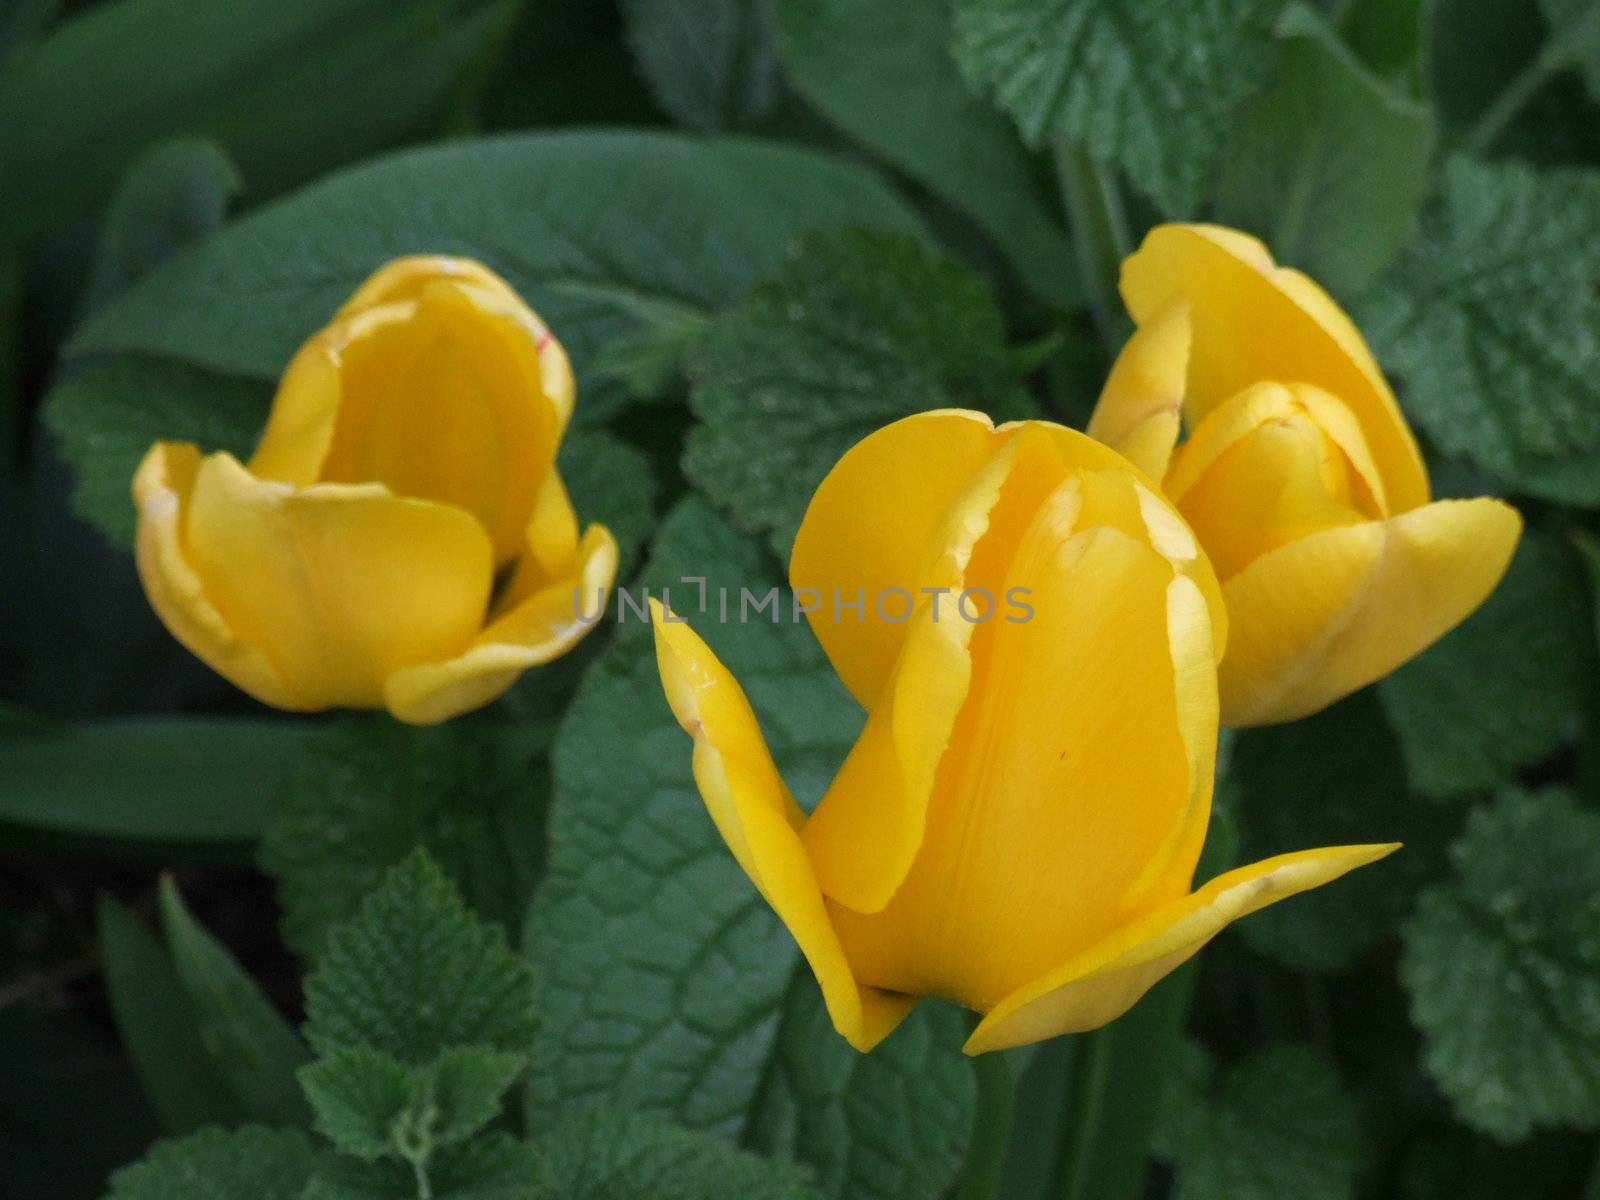 Yellow Tulip Flowers with Green Foliage